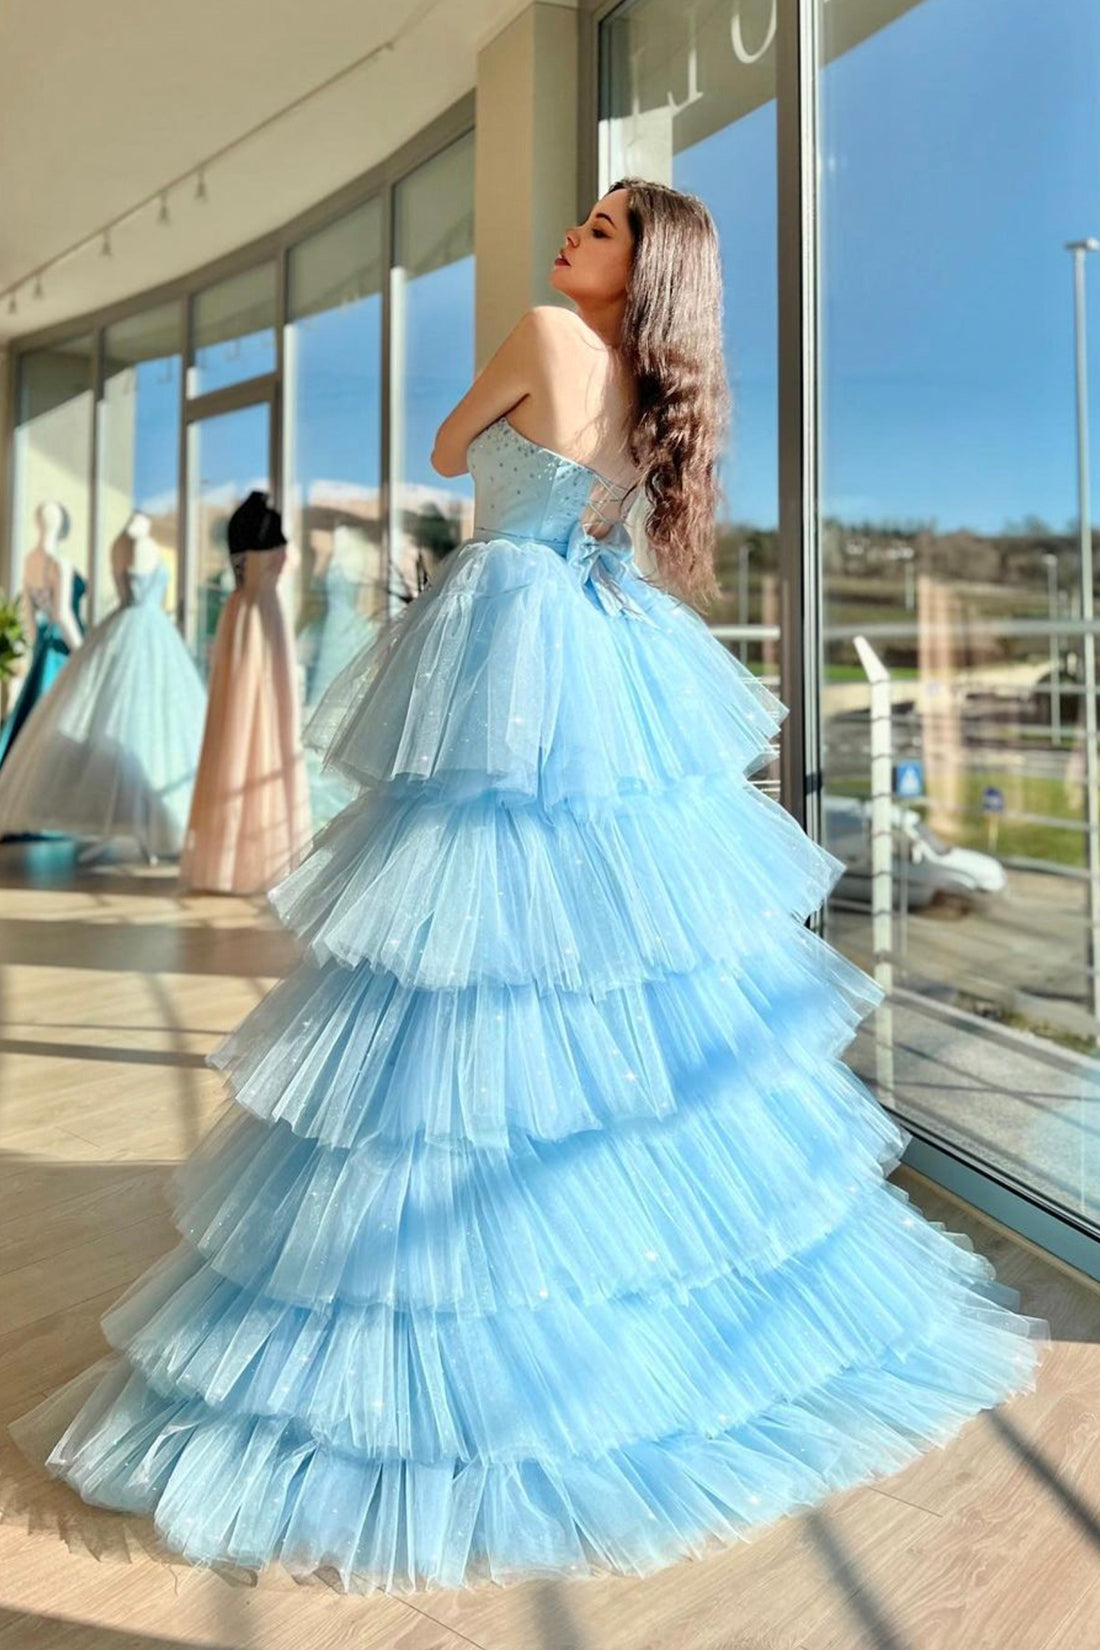 Blue Sweetheart Neck Tulle Long Prom Dress, Beautiful A-Line High Low Party Dress